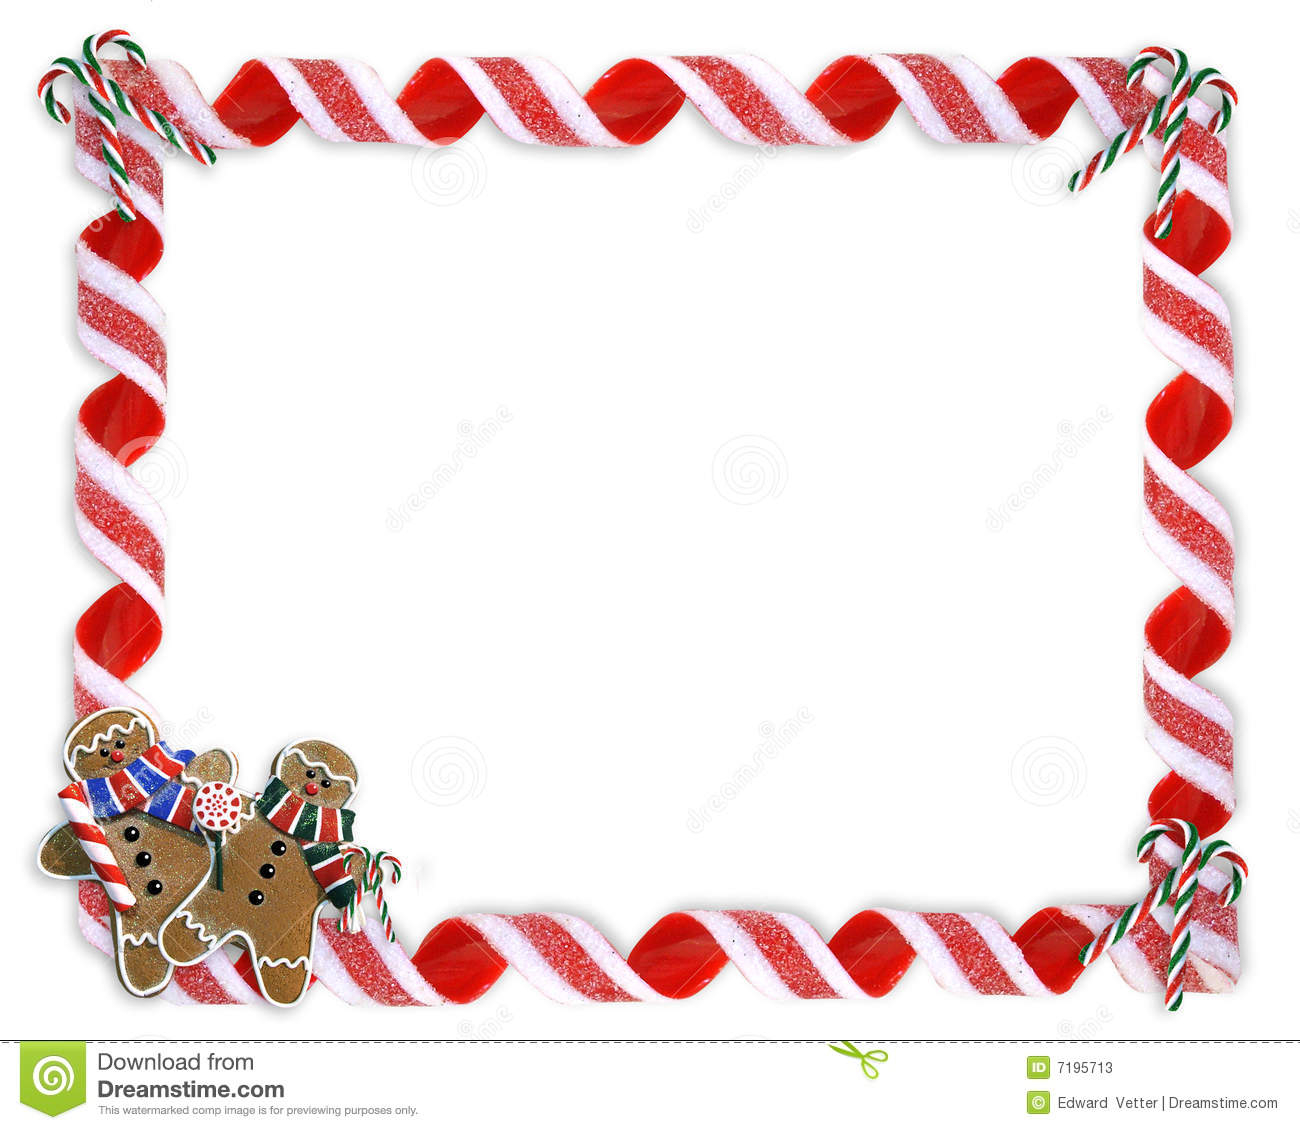 Christmas Letter Border Template - Christmas Border Cookies and Candy Stock Illustration Illustration